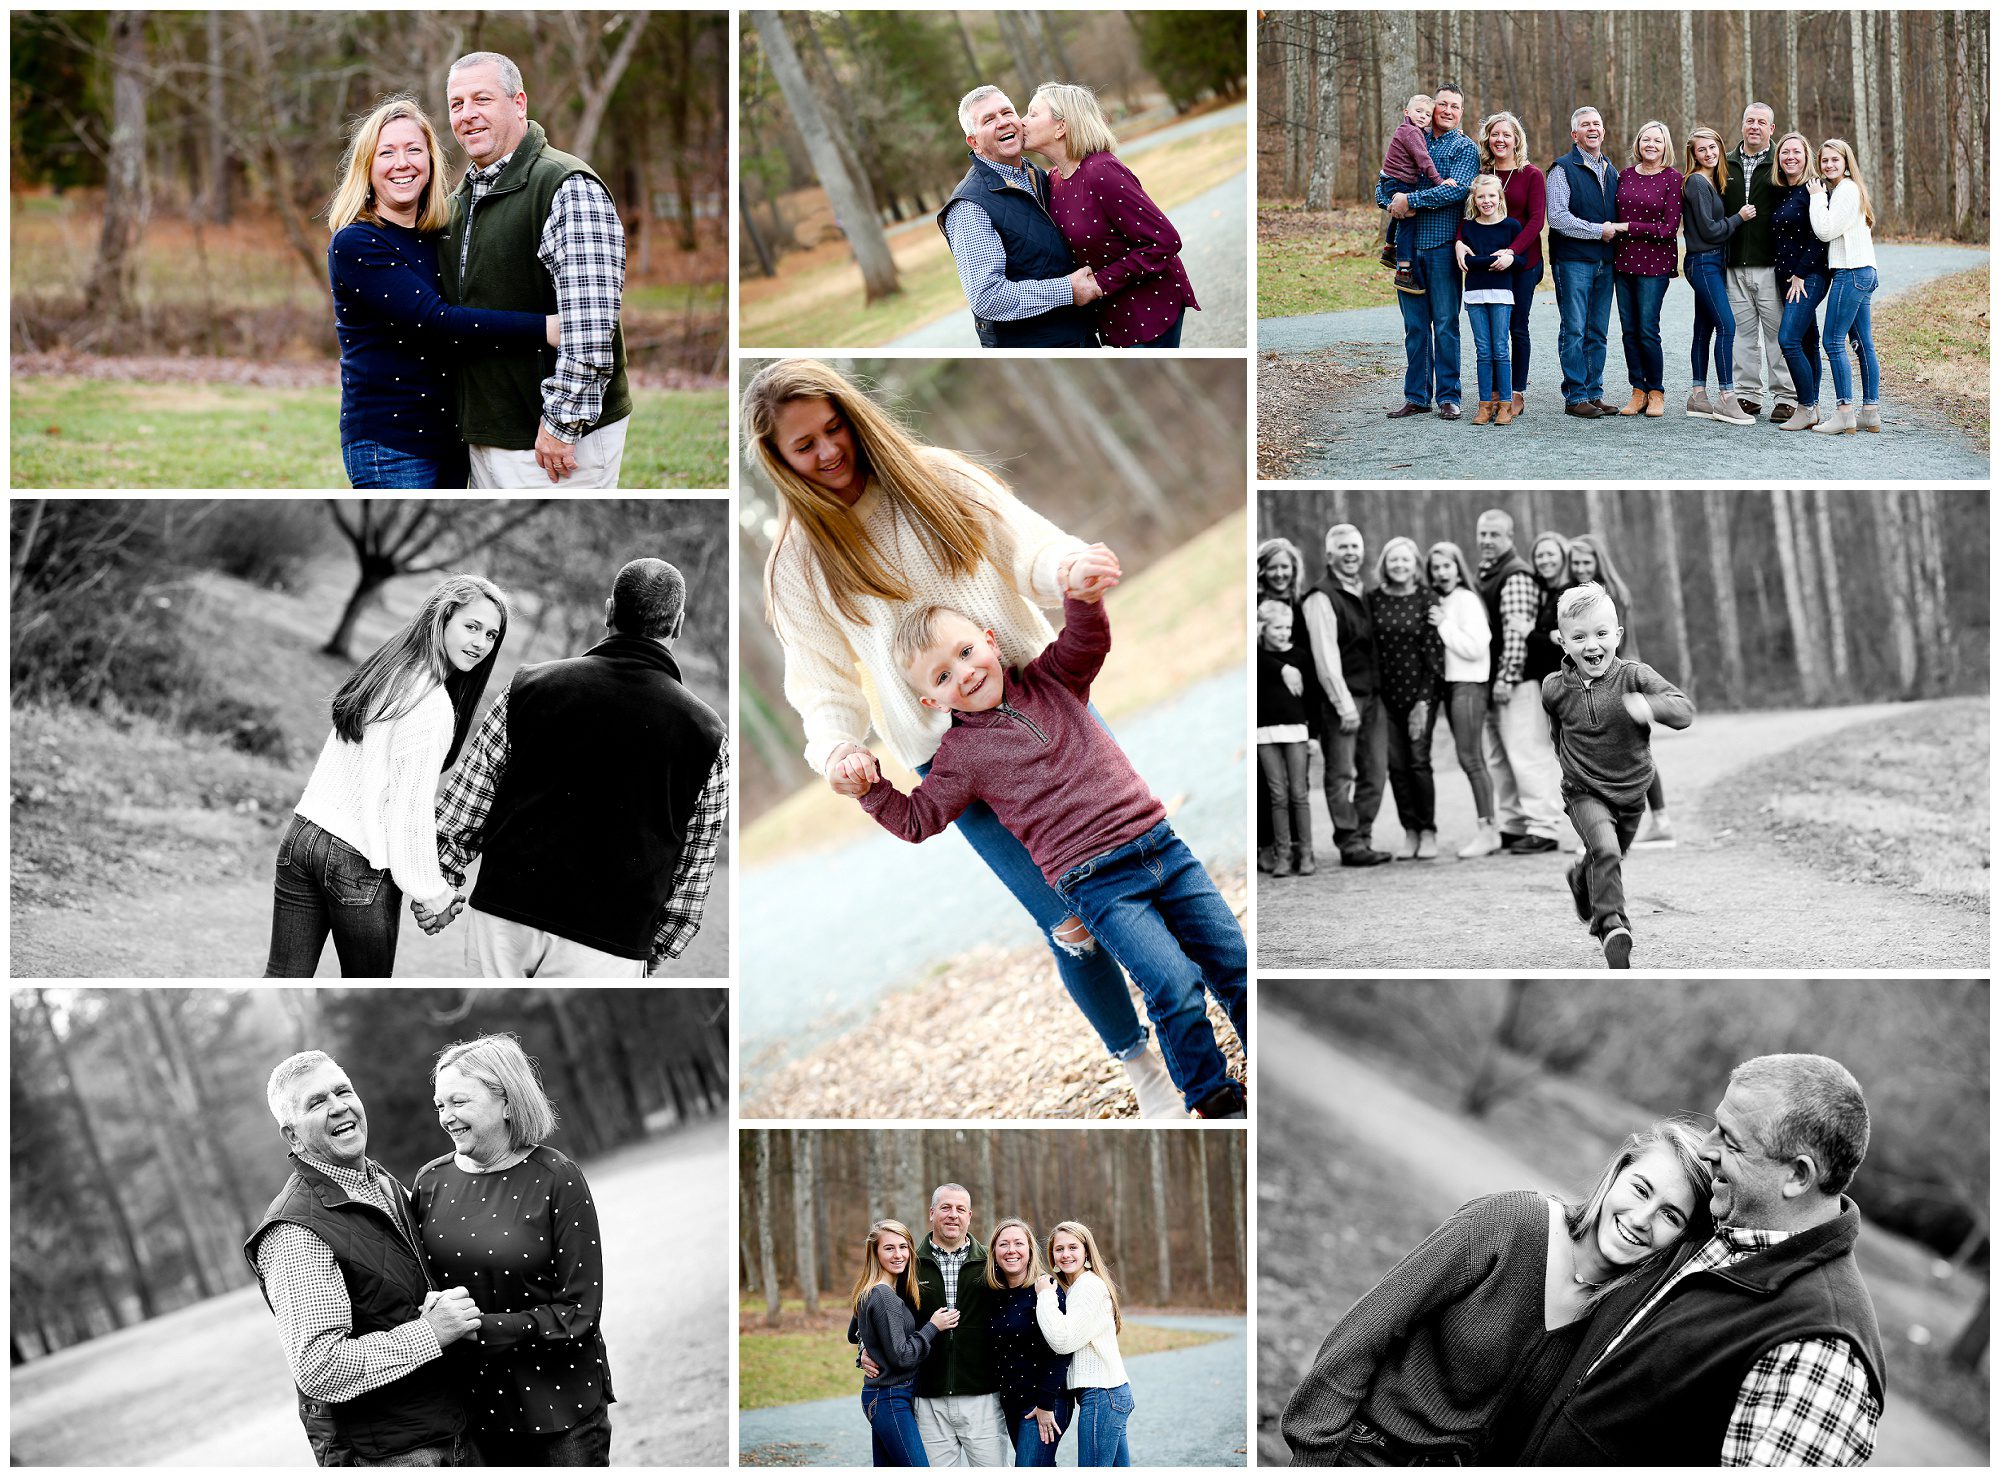 Charlottesville Extended Family Winter Portraits in Albemarle County Cville Photographer Pictures Grandparents Grandchildren Photography Session